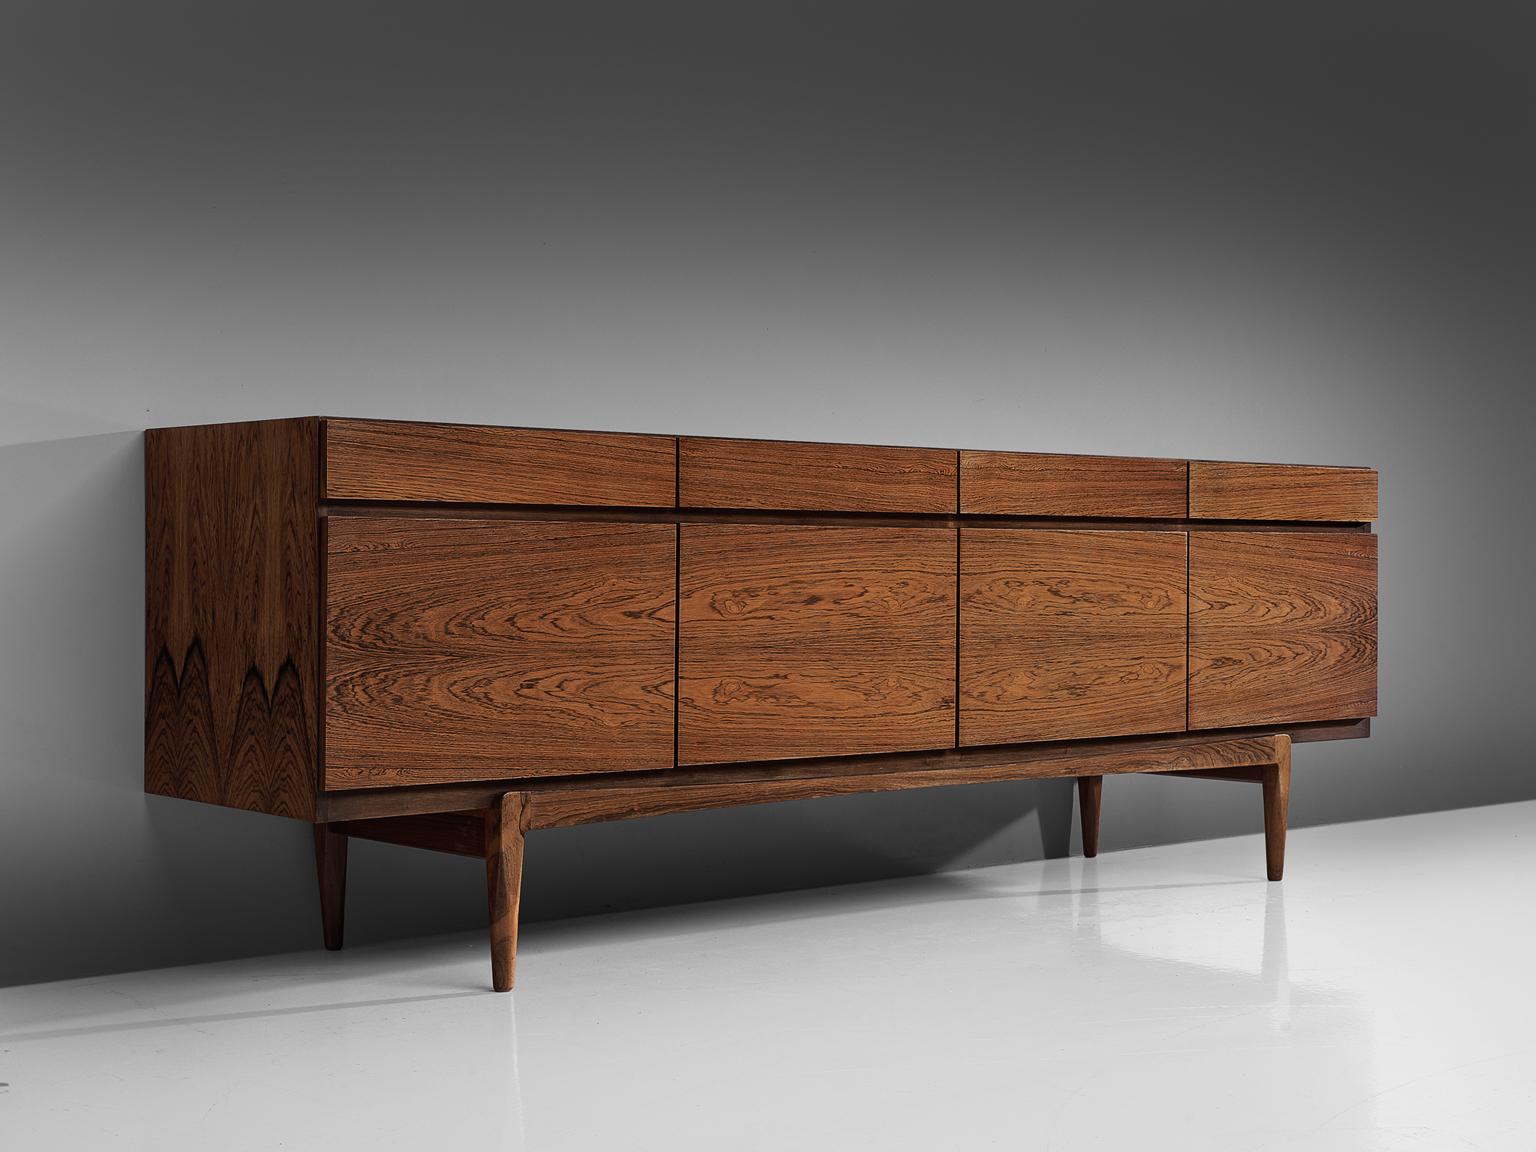 Ib Kofod-Larsen for Faarup Møbelfabrik, sideboard model FA66, rosewood, Denmark, 1960s.

Excellent designed credenza by Ib Kofod-Larsen. The sideboard contains four doors with four drawers directly above it. The inside contains three shelves and